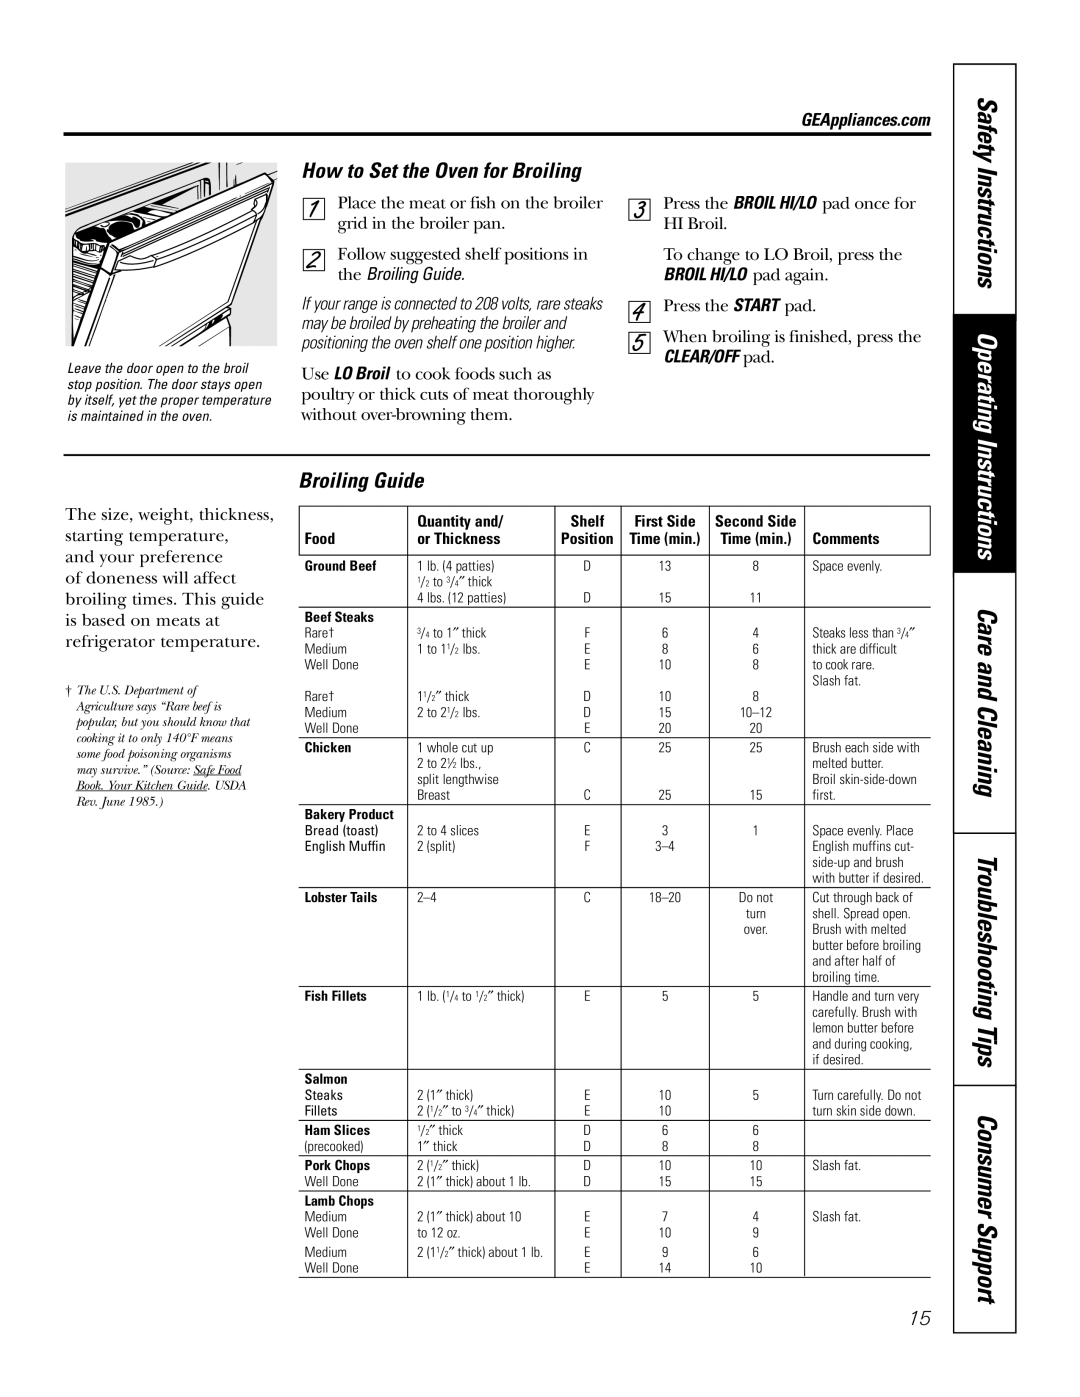 GE JRP80 Instructions Care and Cleaning Troubleshooting Tips Consumer Support, Safety, How to Set the Oven for Broiling 